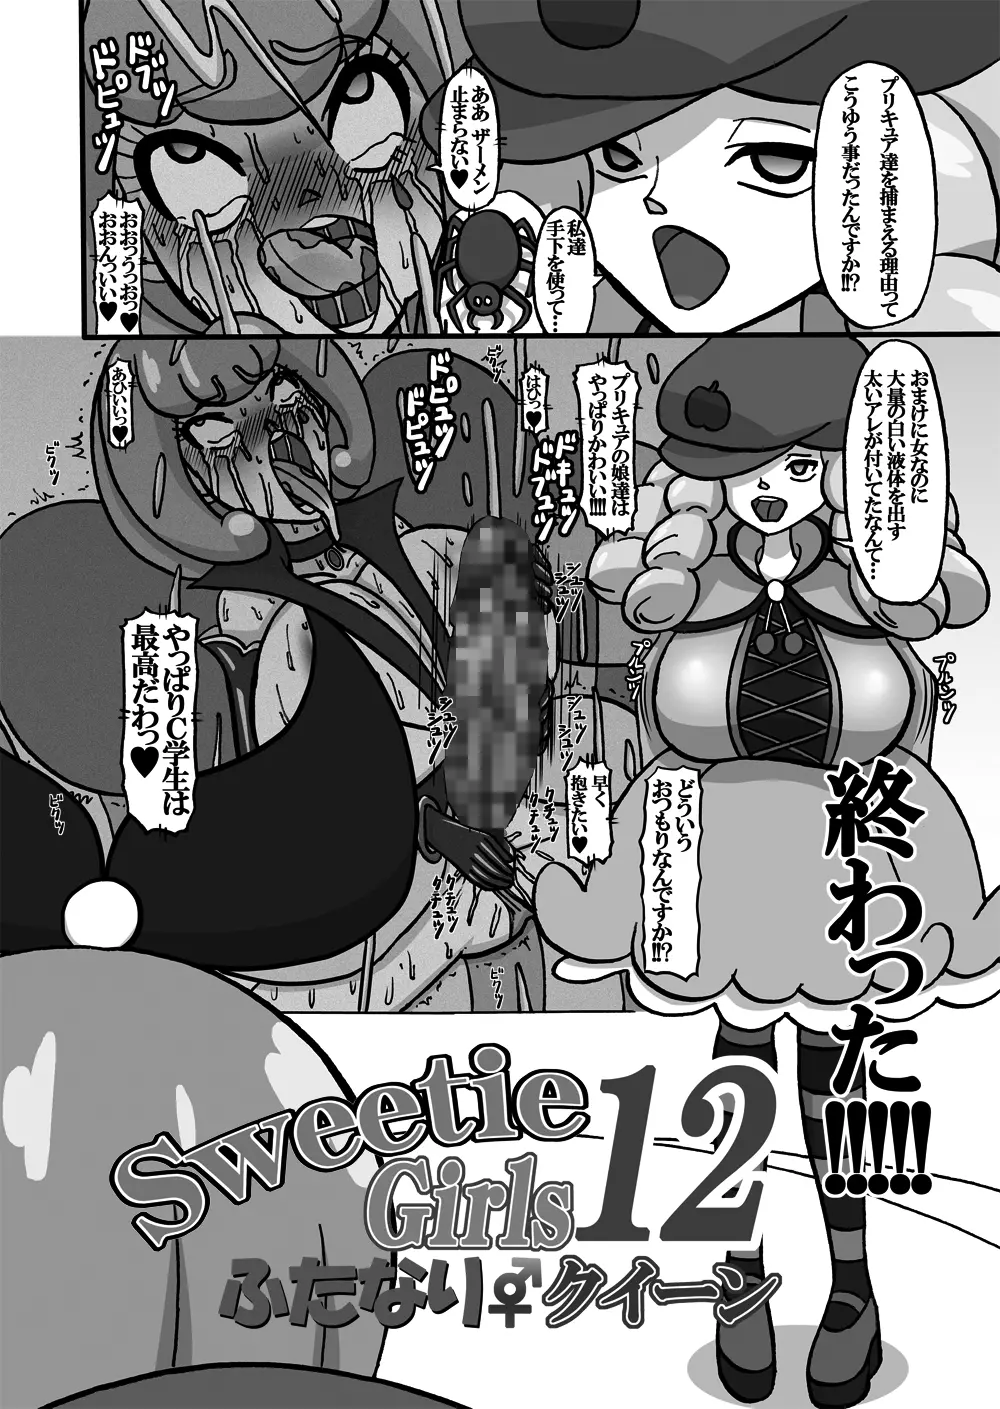 Sweetie Girls 12 ～ふたなりクイーン～ Page.4